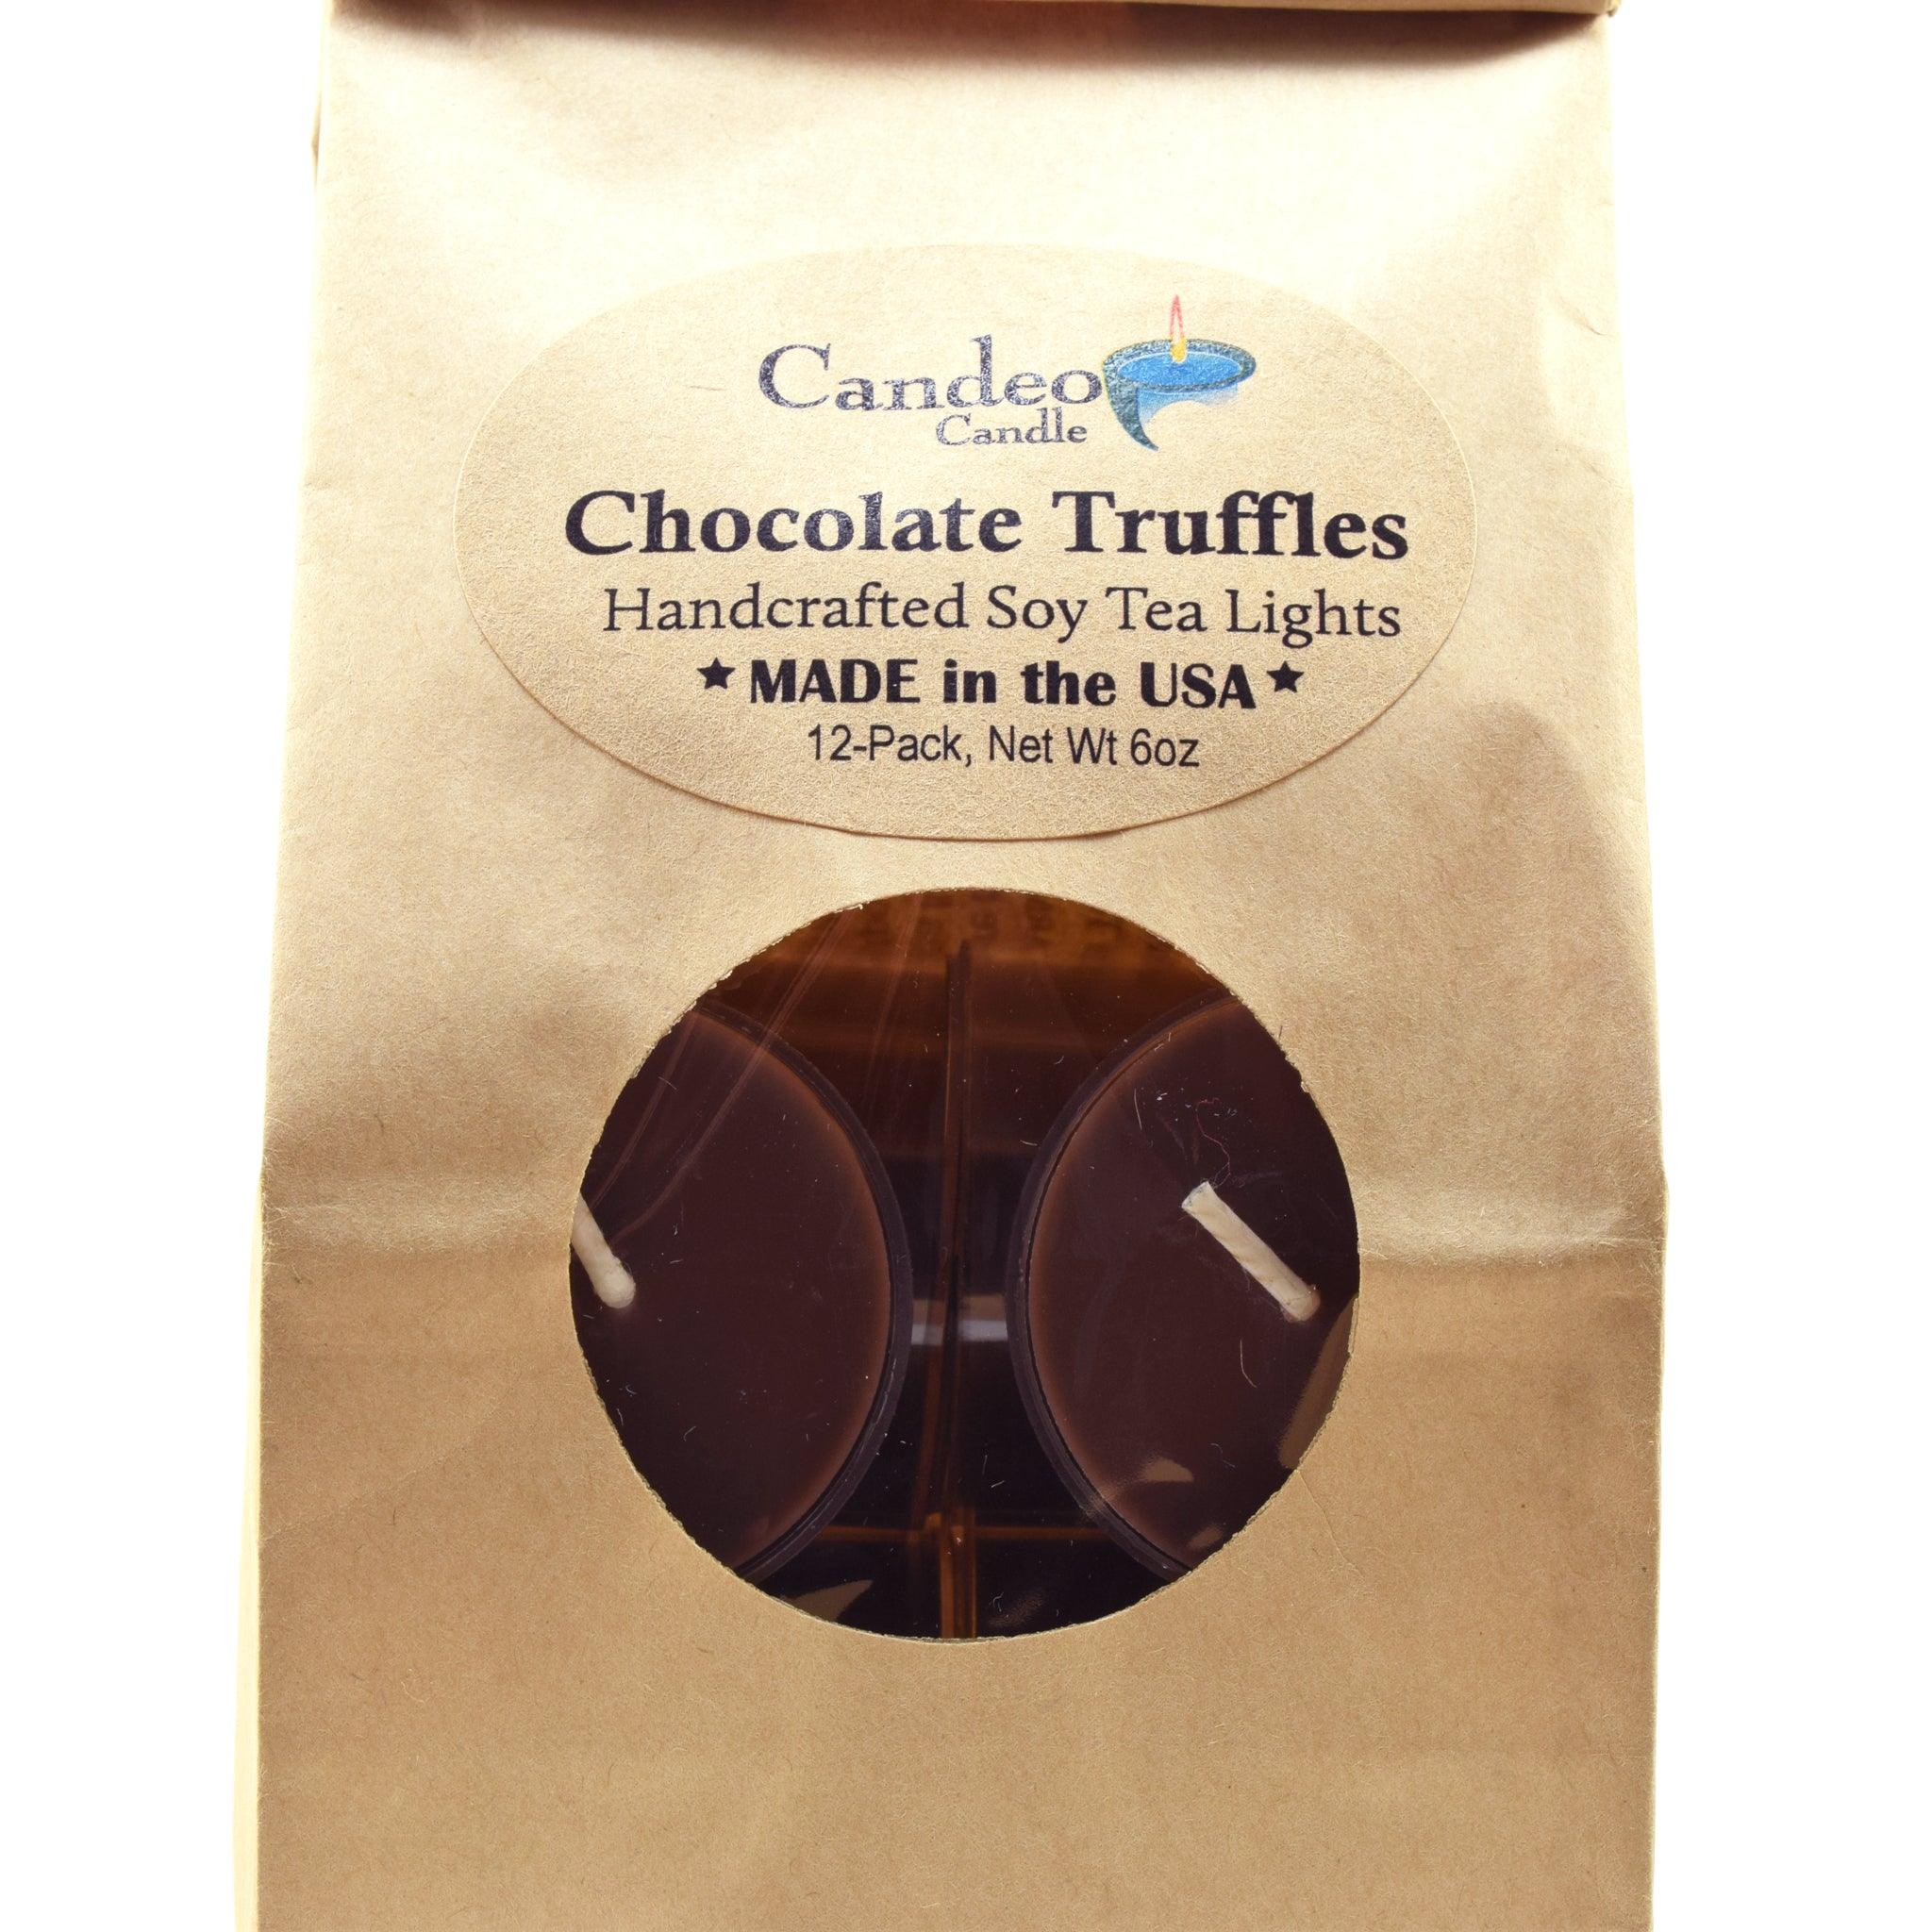 Chocolate Truffles, Soy Tea Light 12-Pack - Candeo Candle